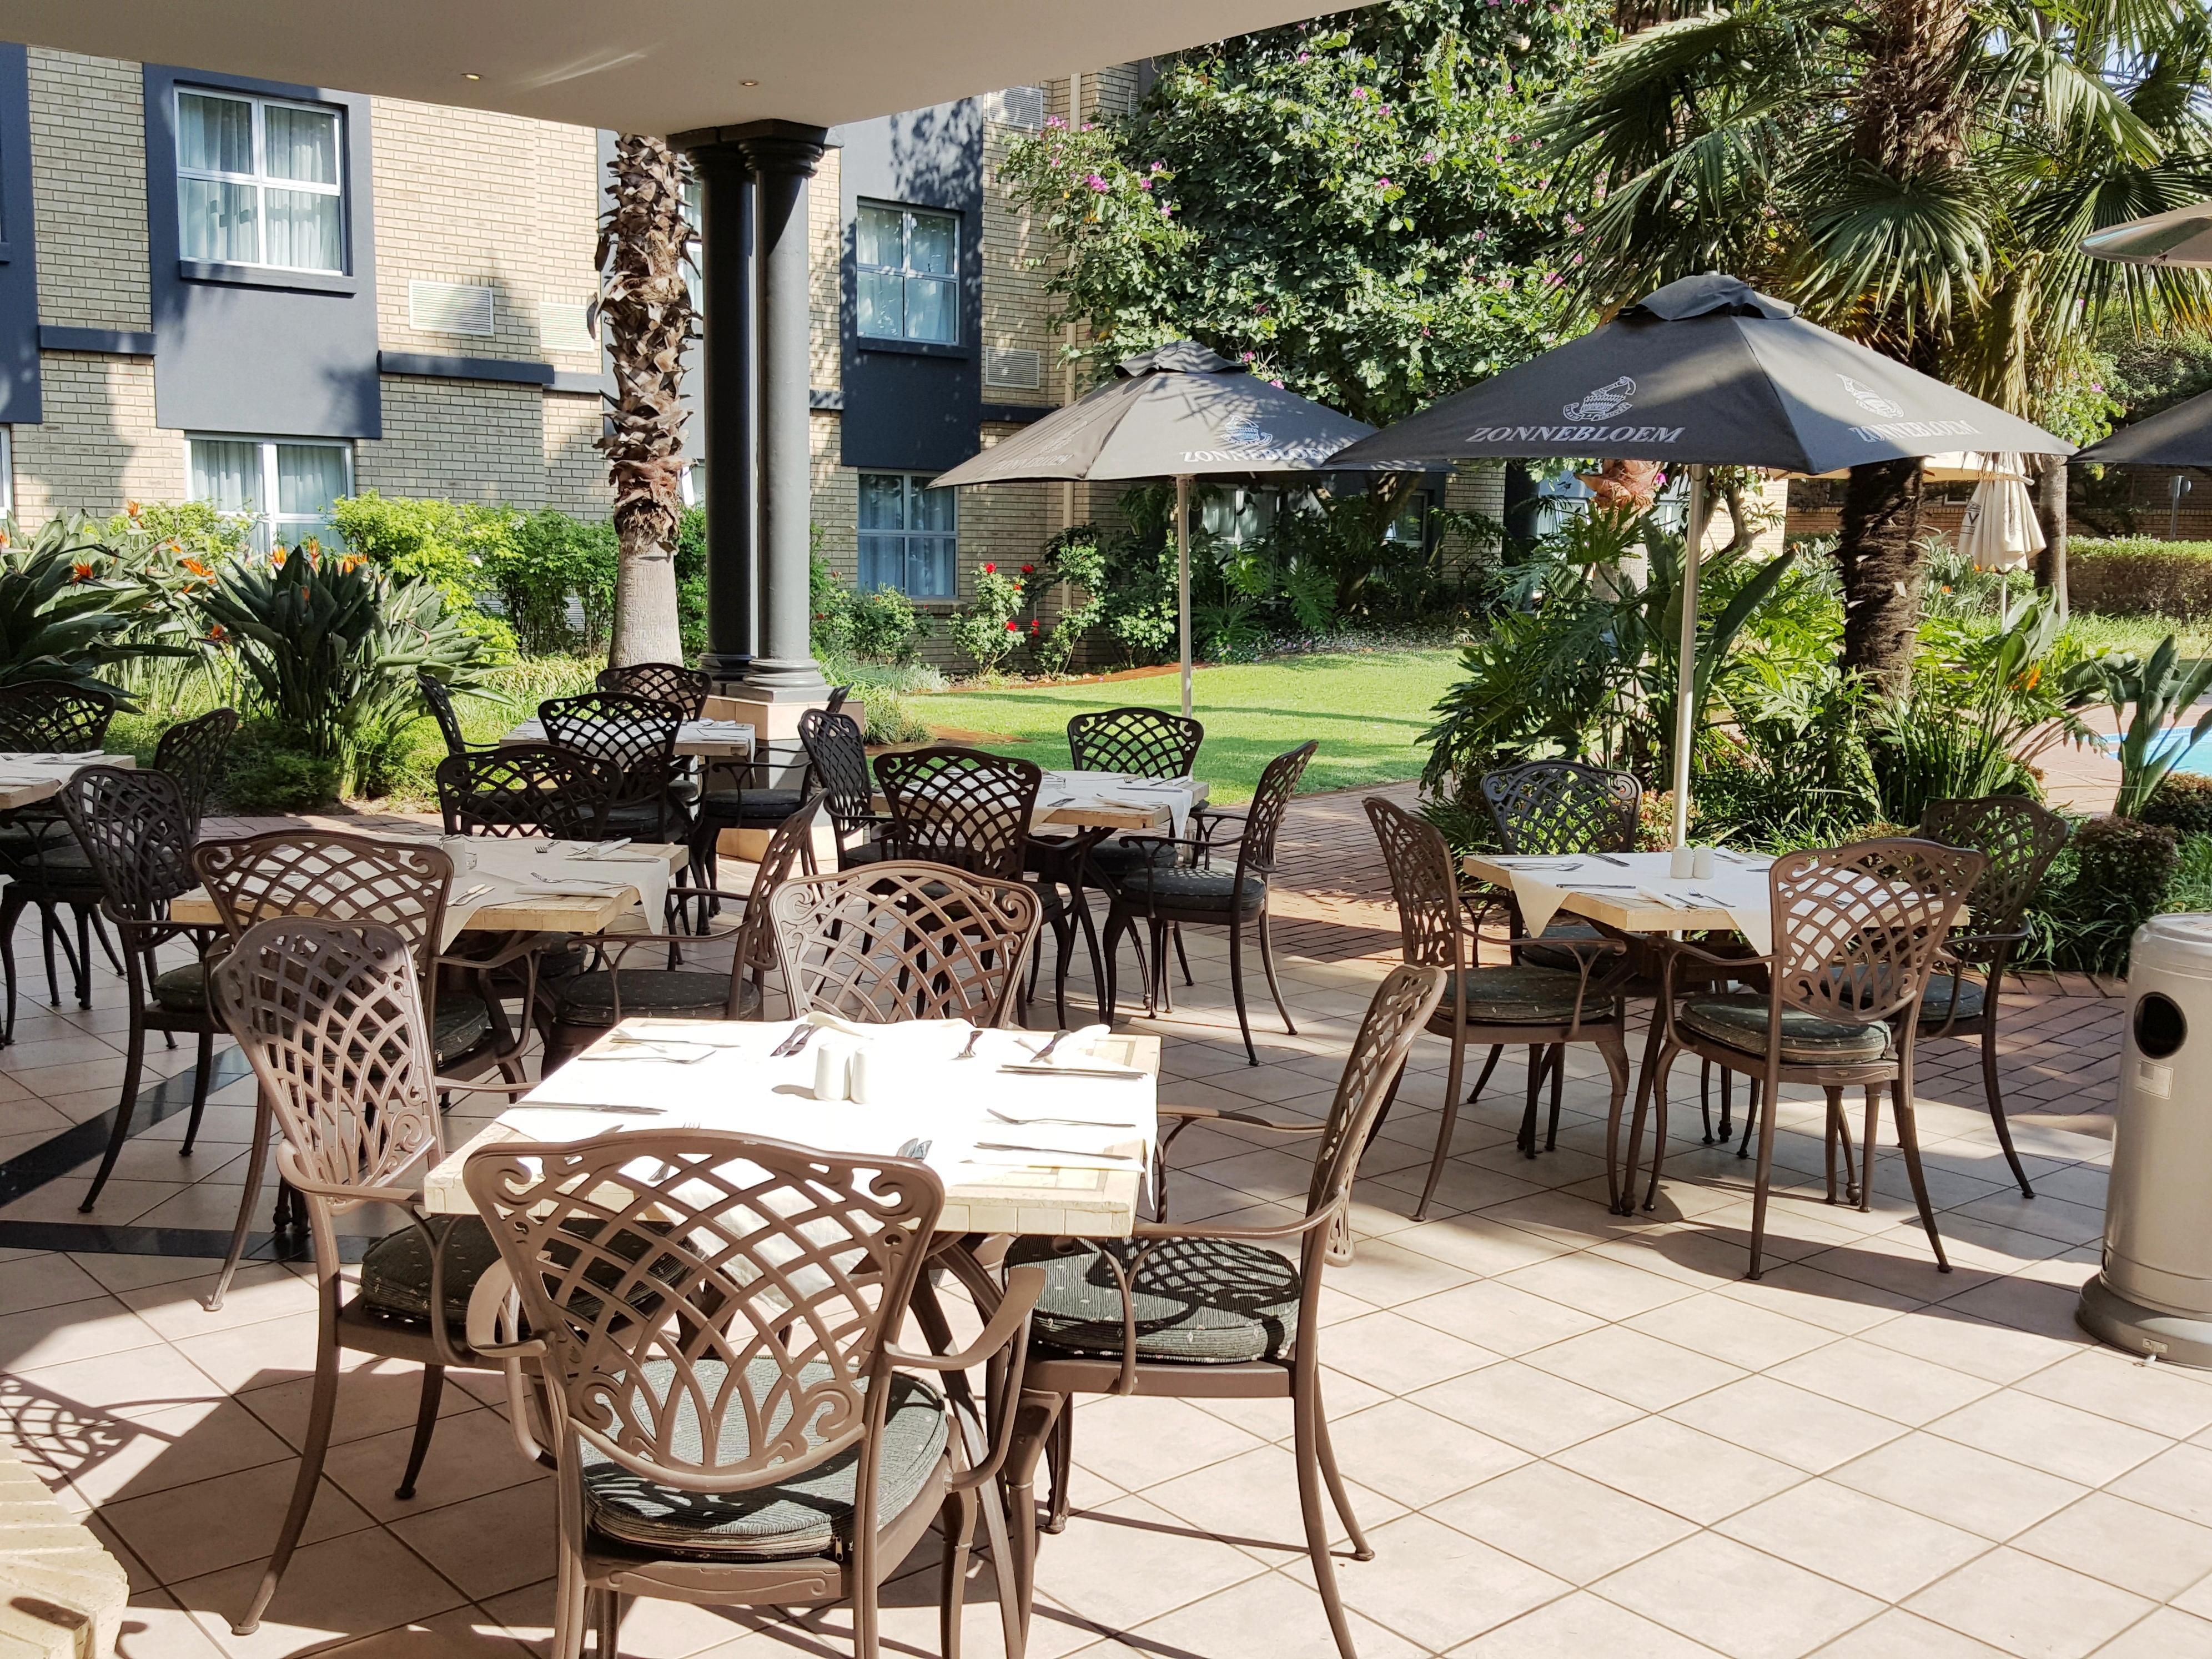 Kick start your day at Holiday Inn Johannesburg Airport with a bountiful breakfast buffet, followed by a relaxing poolside lunch and a refreshing beverage at the bar. As the evening unfolds, choose from a la carte and buffet dining options, complemented by a handpicked selection of South African wines.